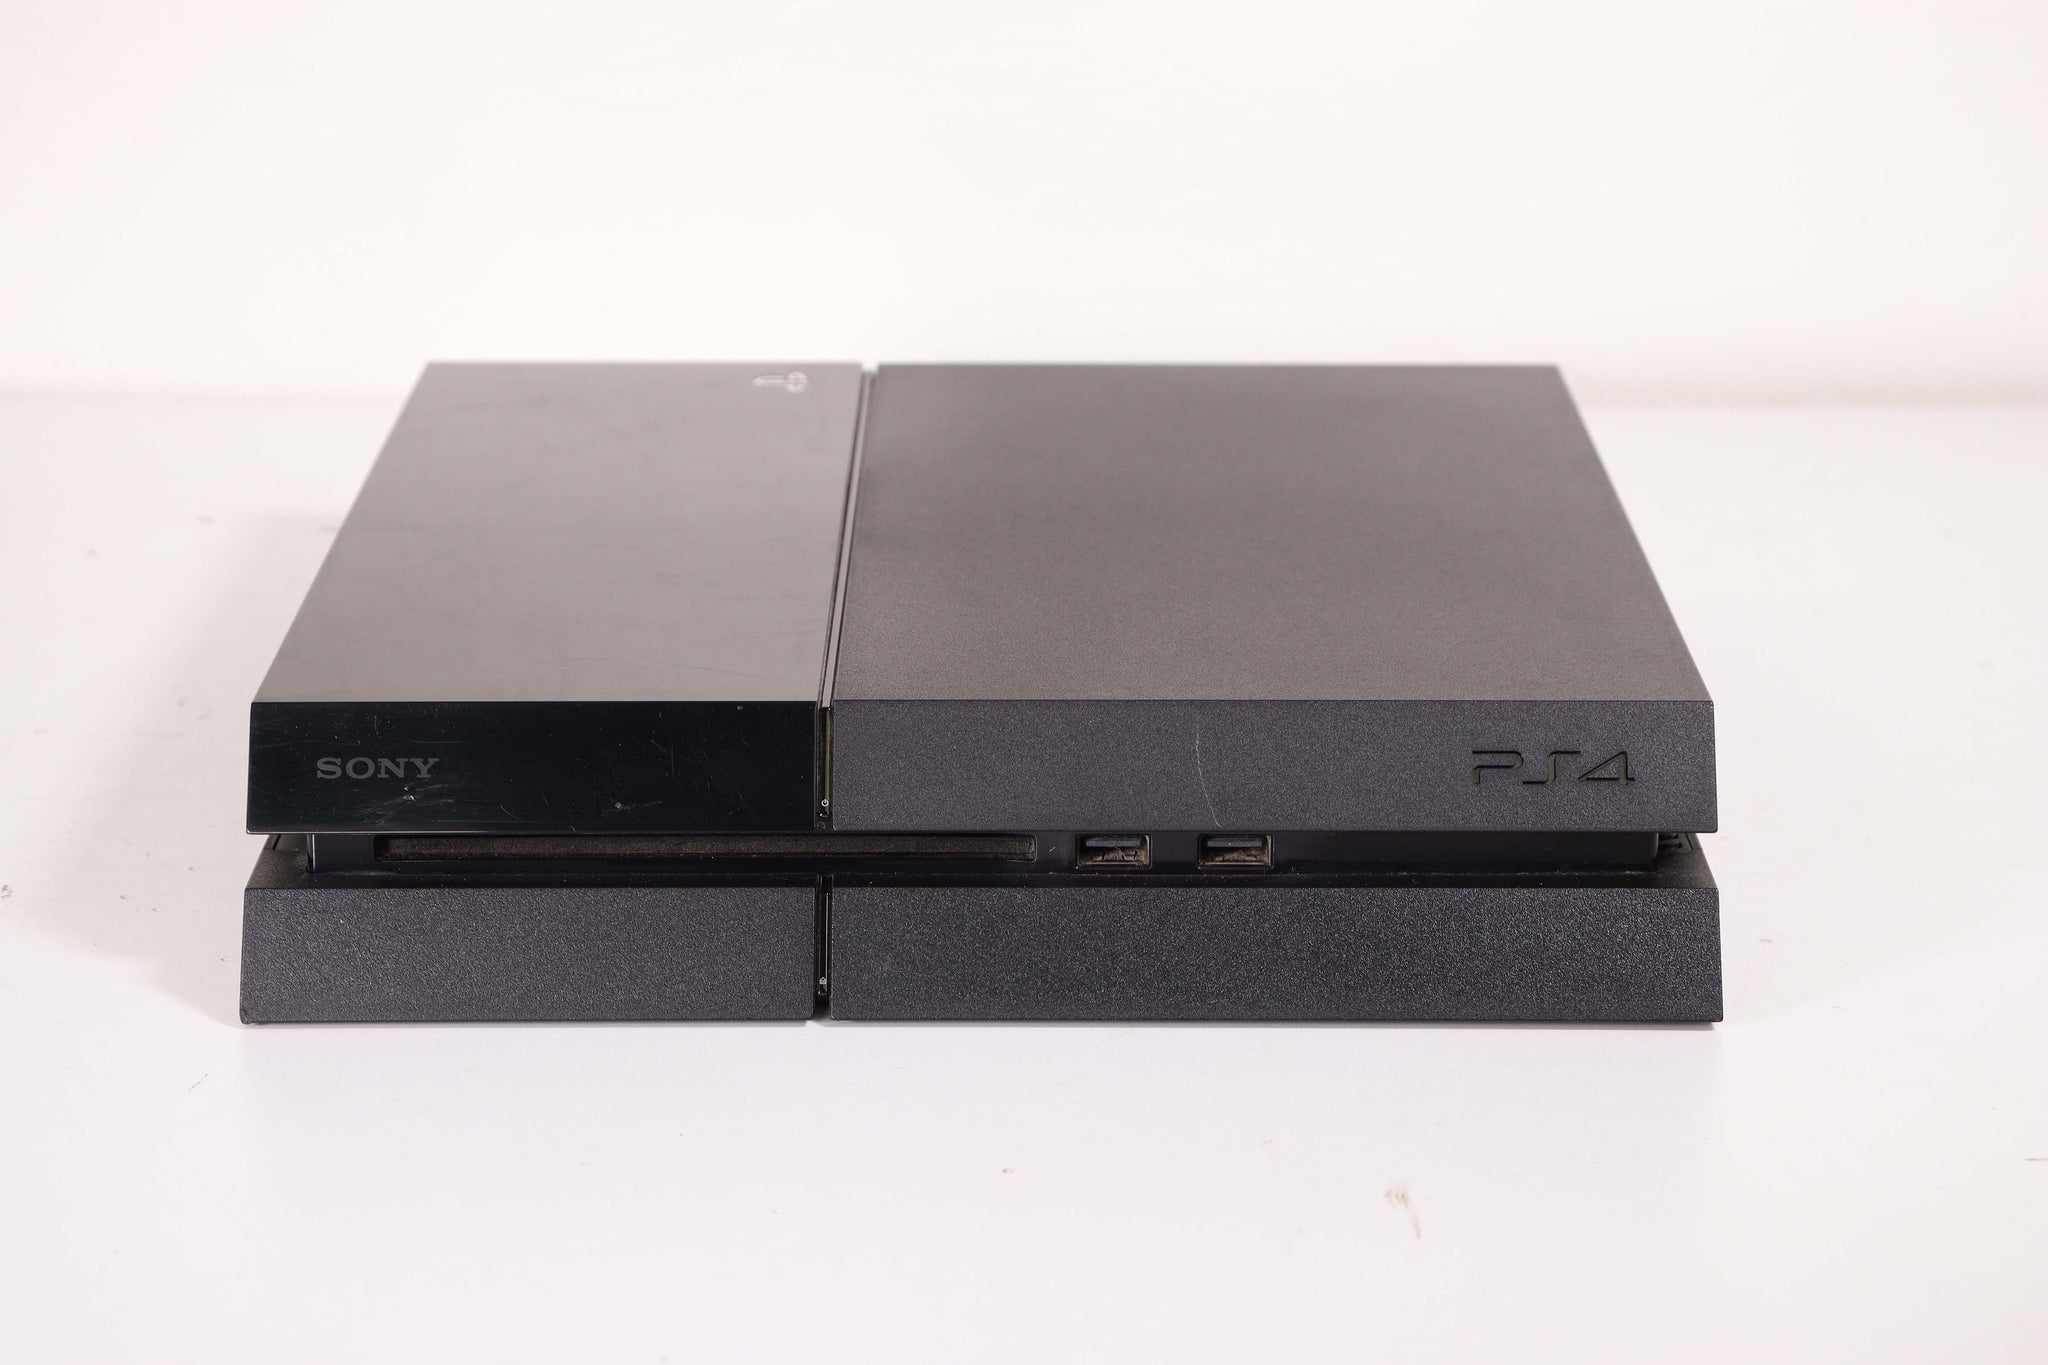 Sony PS4 PlayStation 4 CUH-1001A Game Console Computer Entertainment I